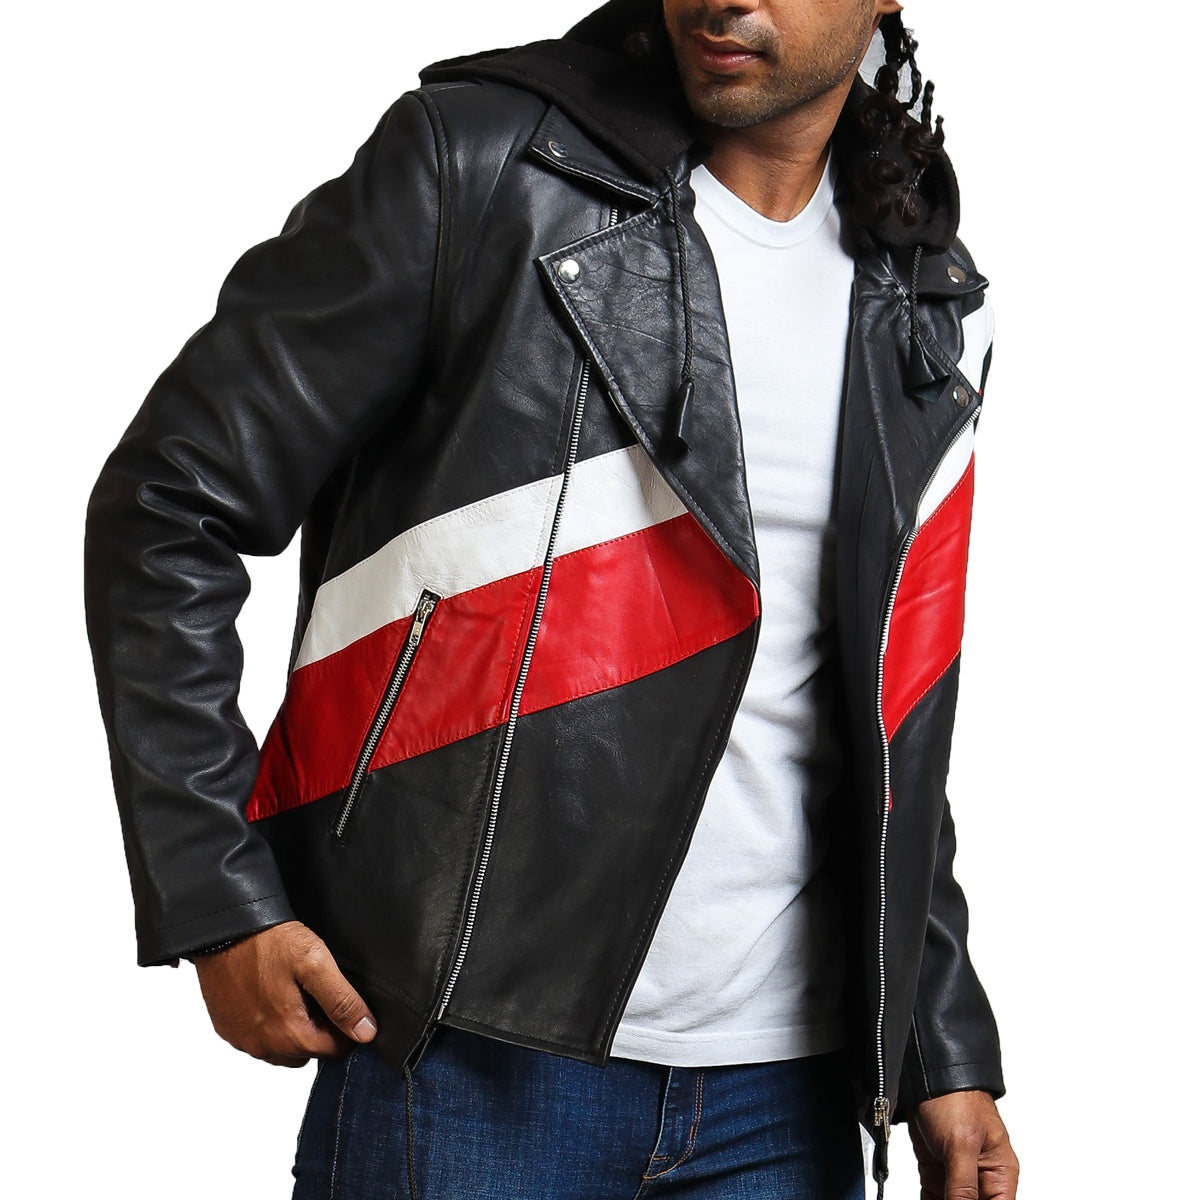 Men's Black Hooded Leather Jacket With Stripes